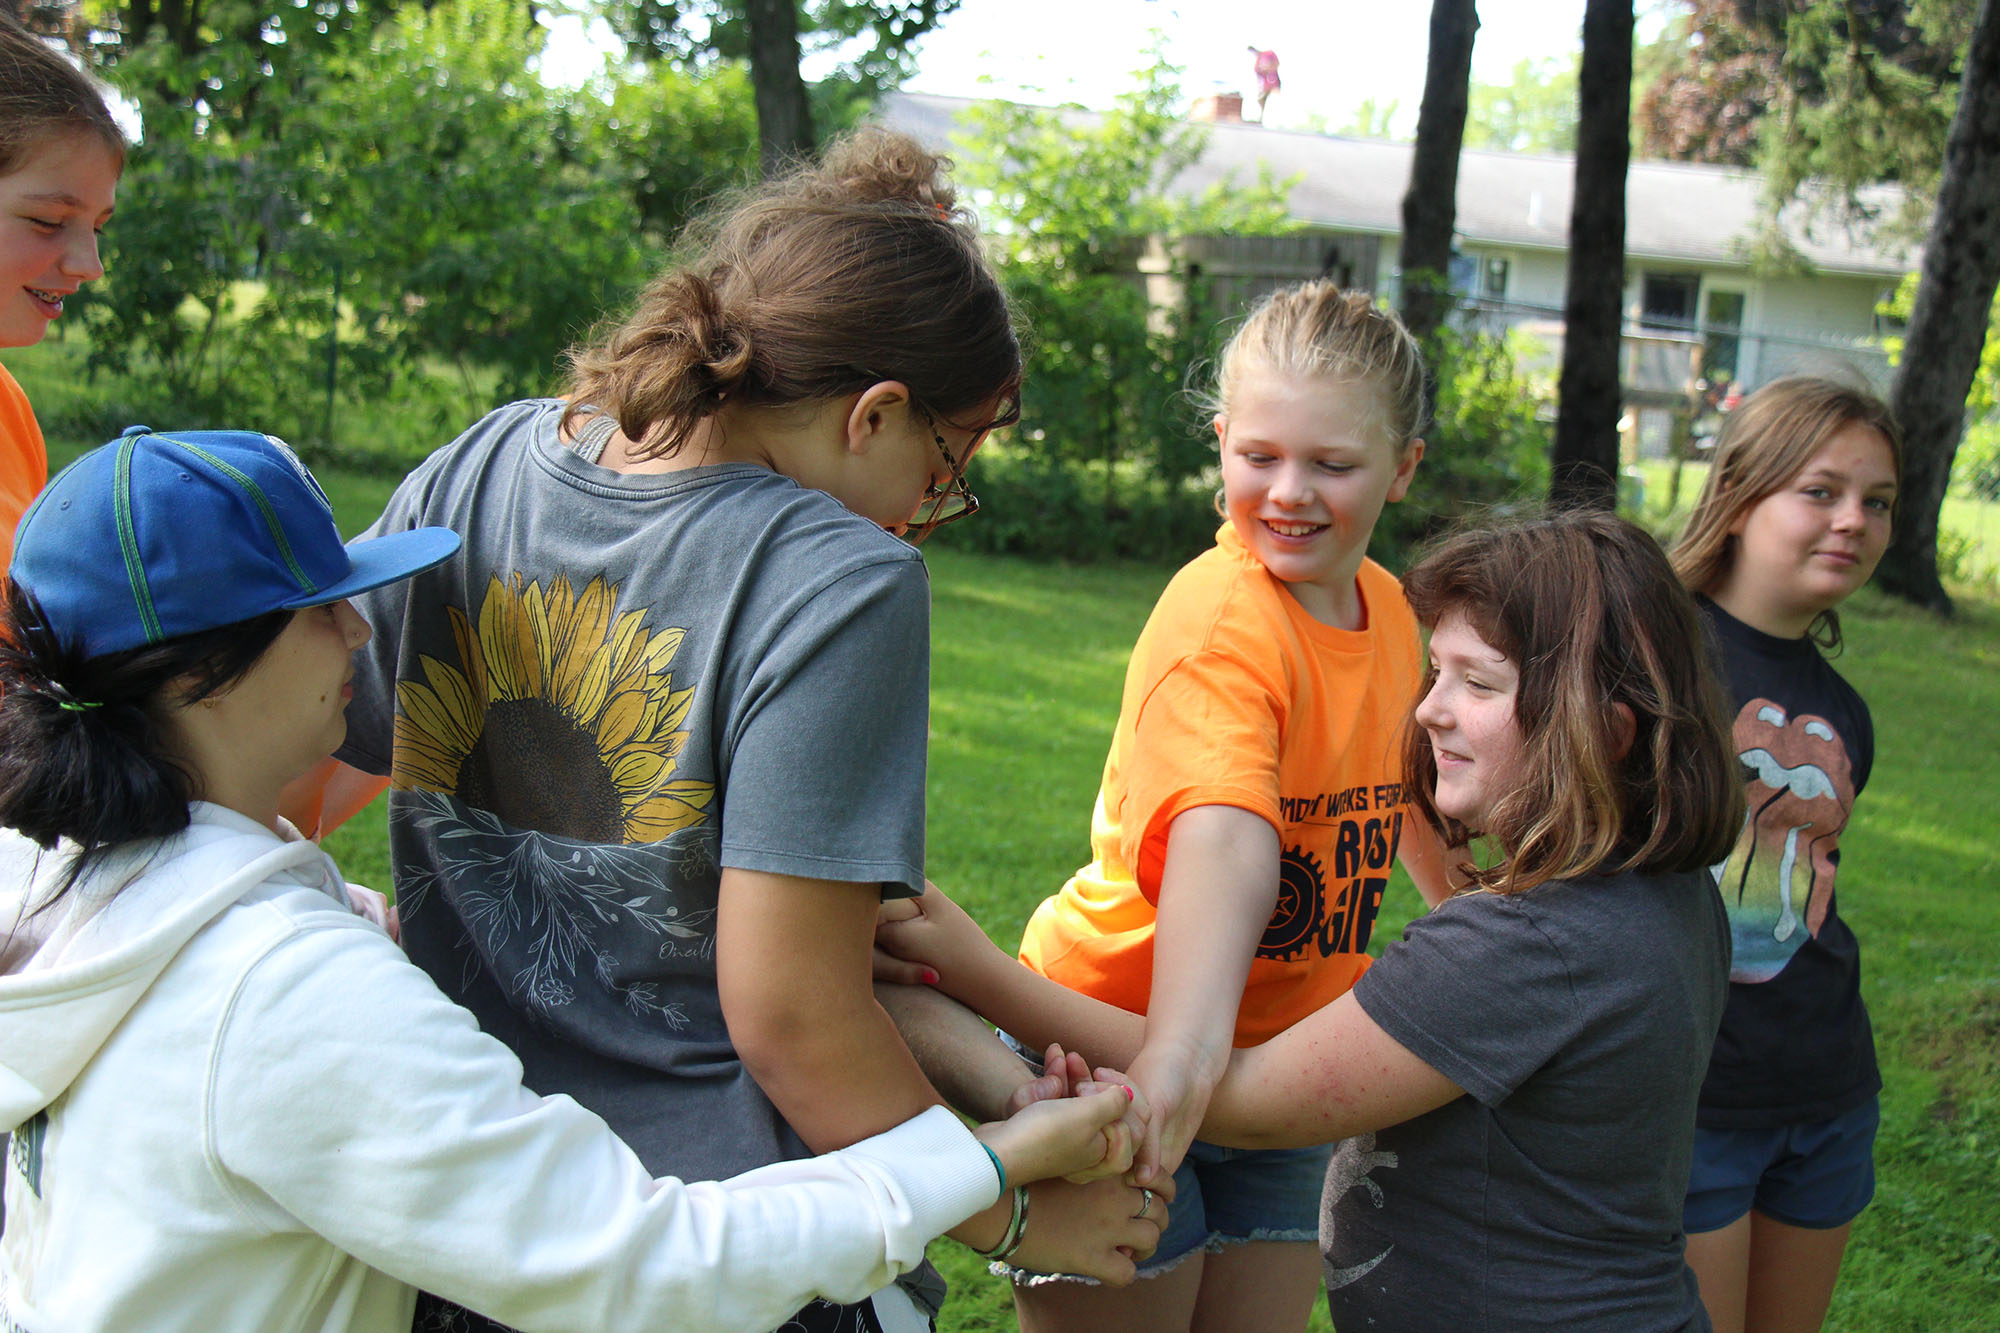 Rosie's Girls campers work on untying themselves from a human pretzel.